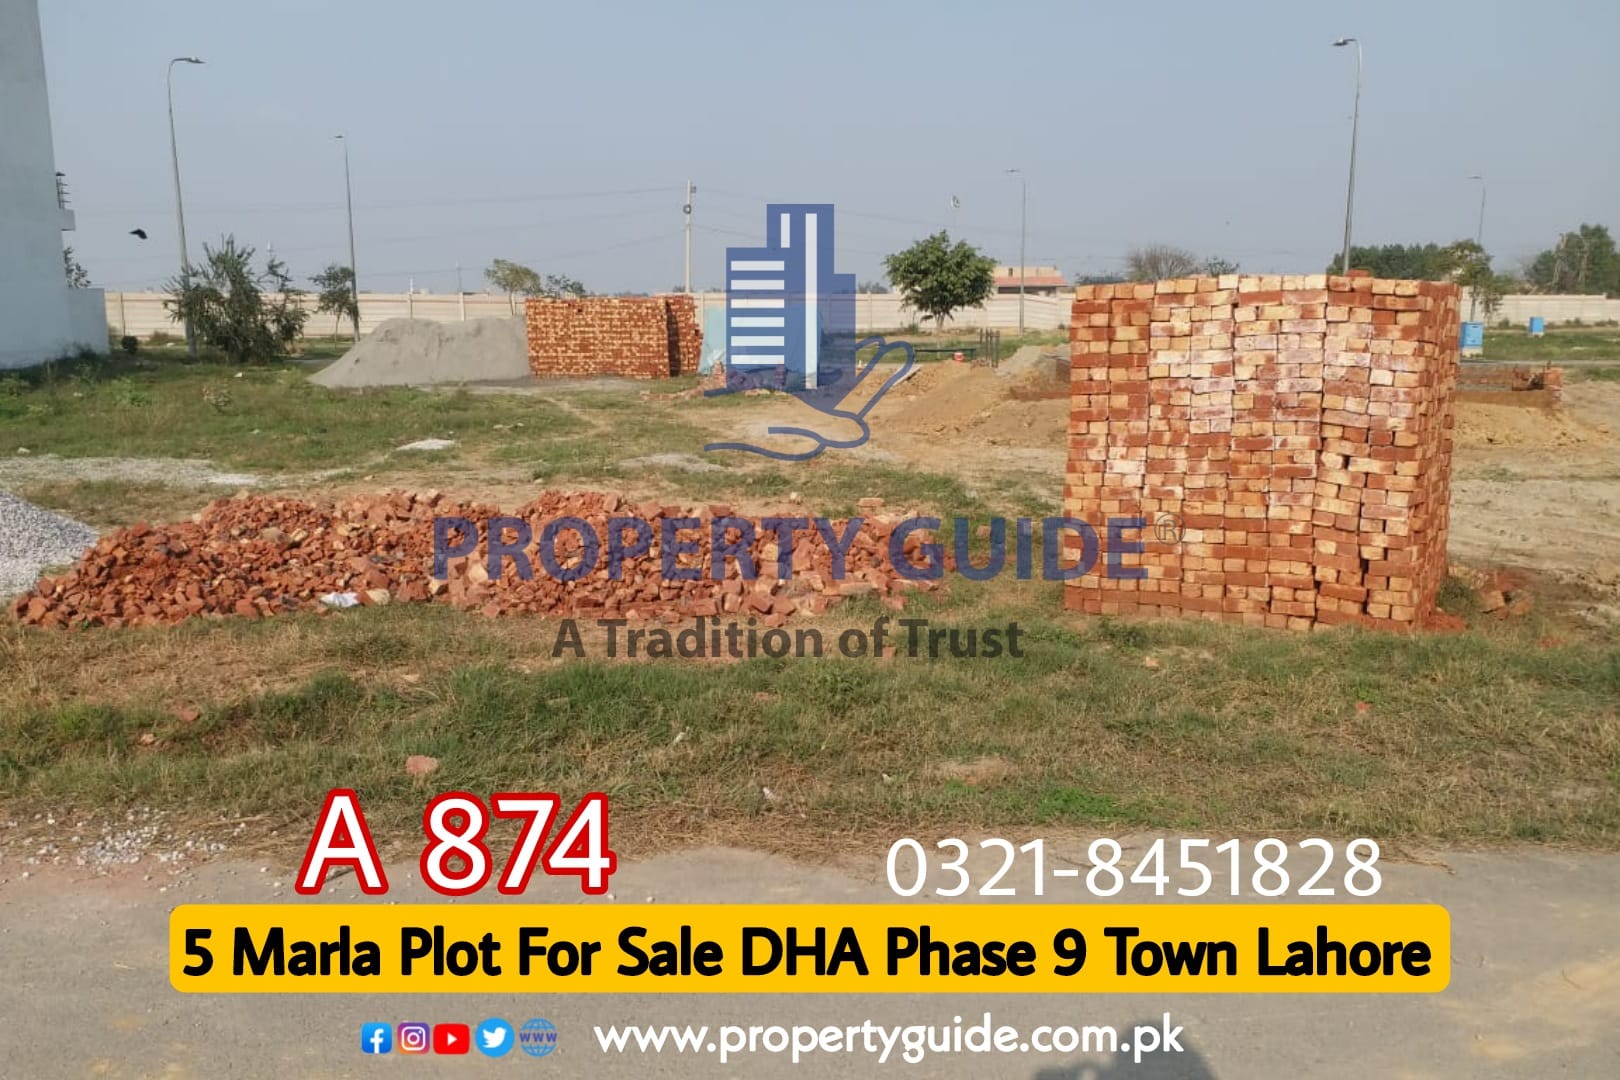 5 Marla Plot For Sale 874 A – DHA Phase 9 Town Lahore